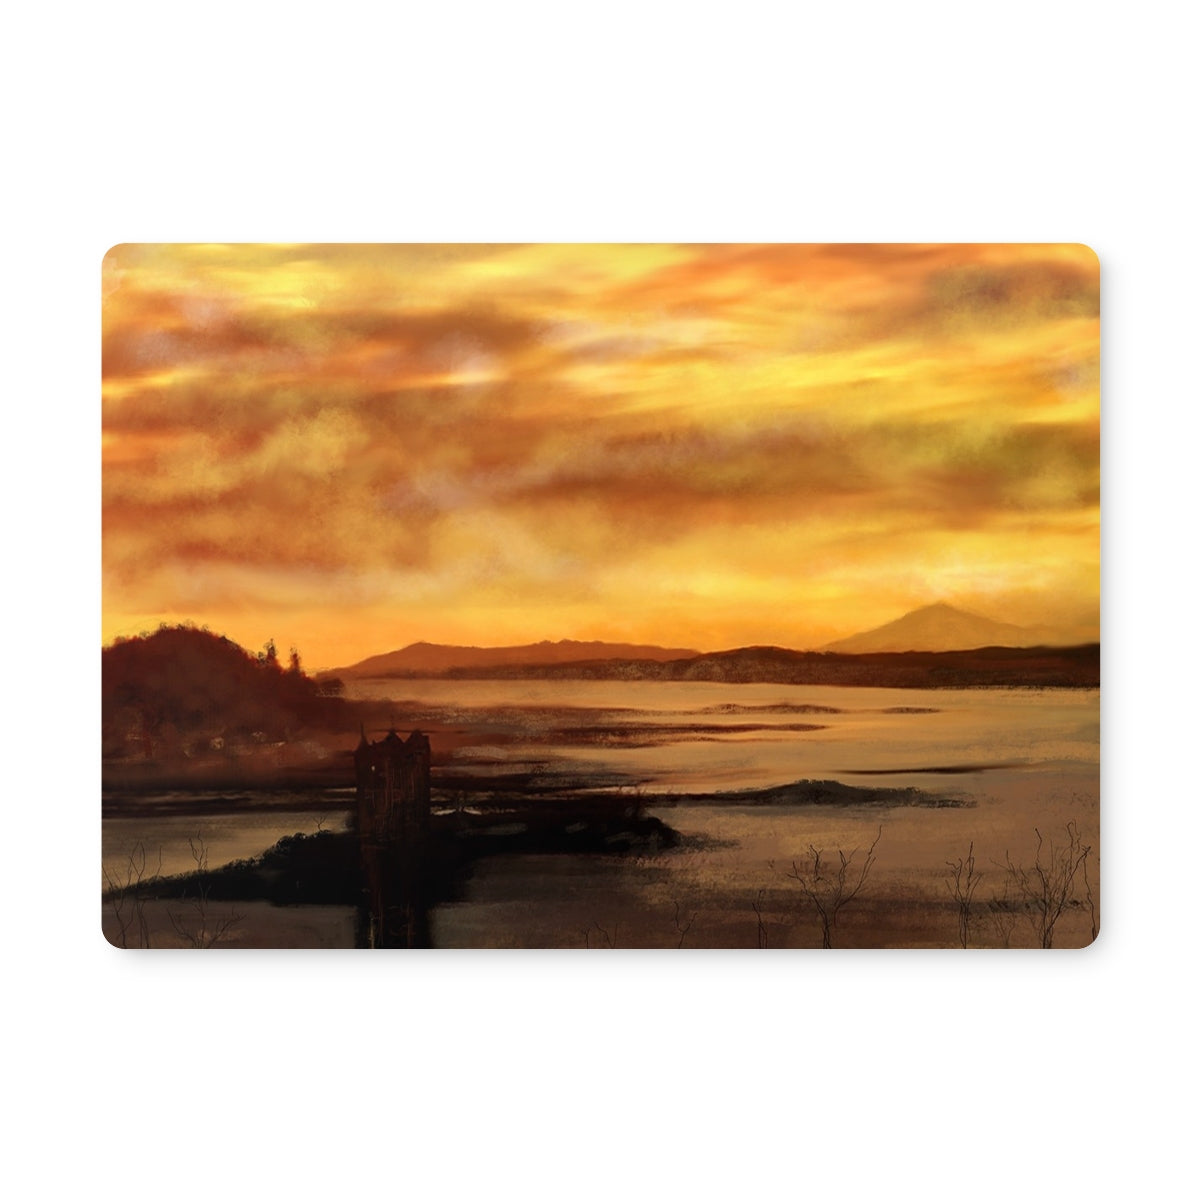 Castle Stalker Dusk Art Gifts Placemat-Placemats-Historic & Iconic Scotland Art Gallery-2 Placemats-Paintings, Prints, Homeware, Art Gifts From Scotland By Scottish Artist Kevin Hunter